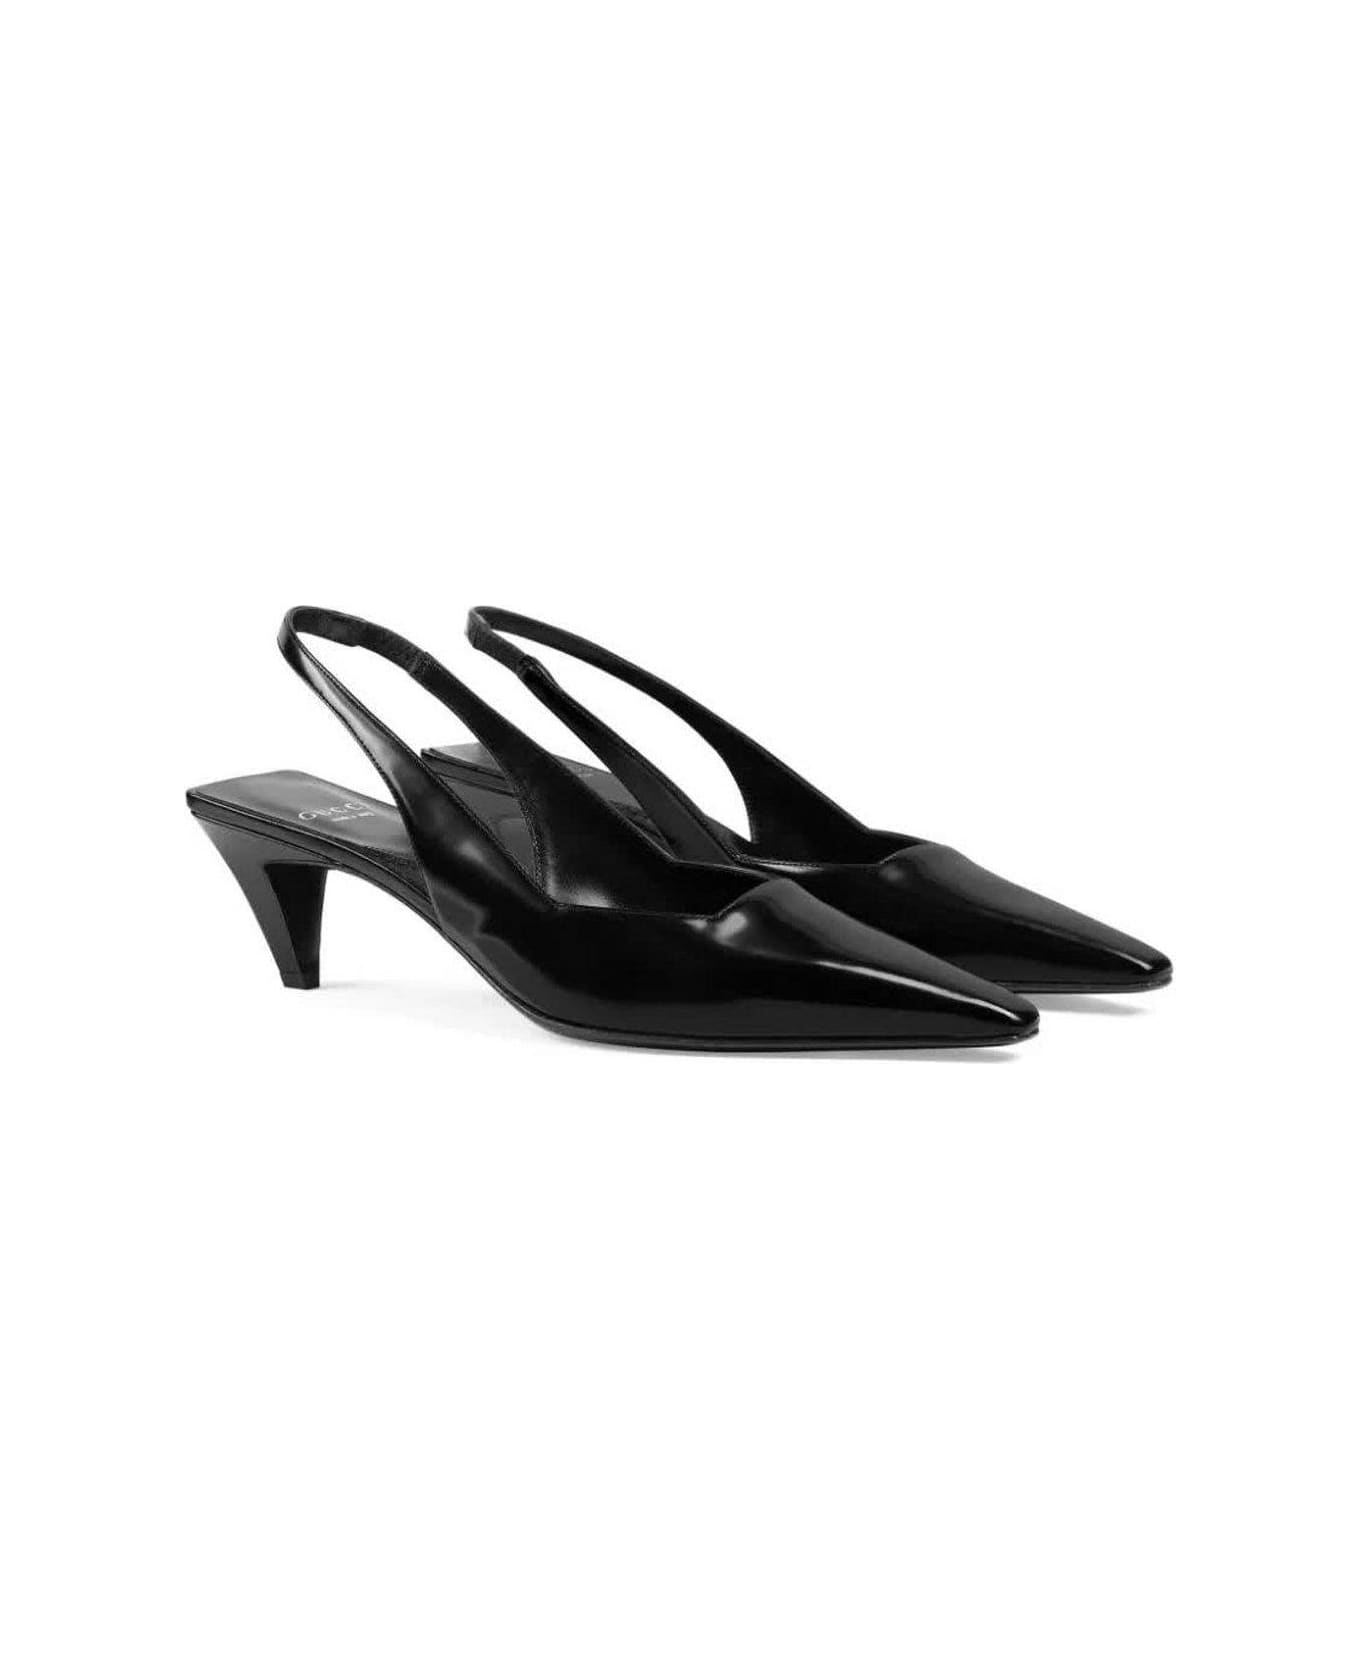 Gucci Pointed-toe Slingback Pumps